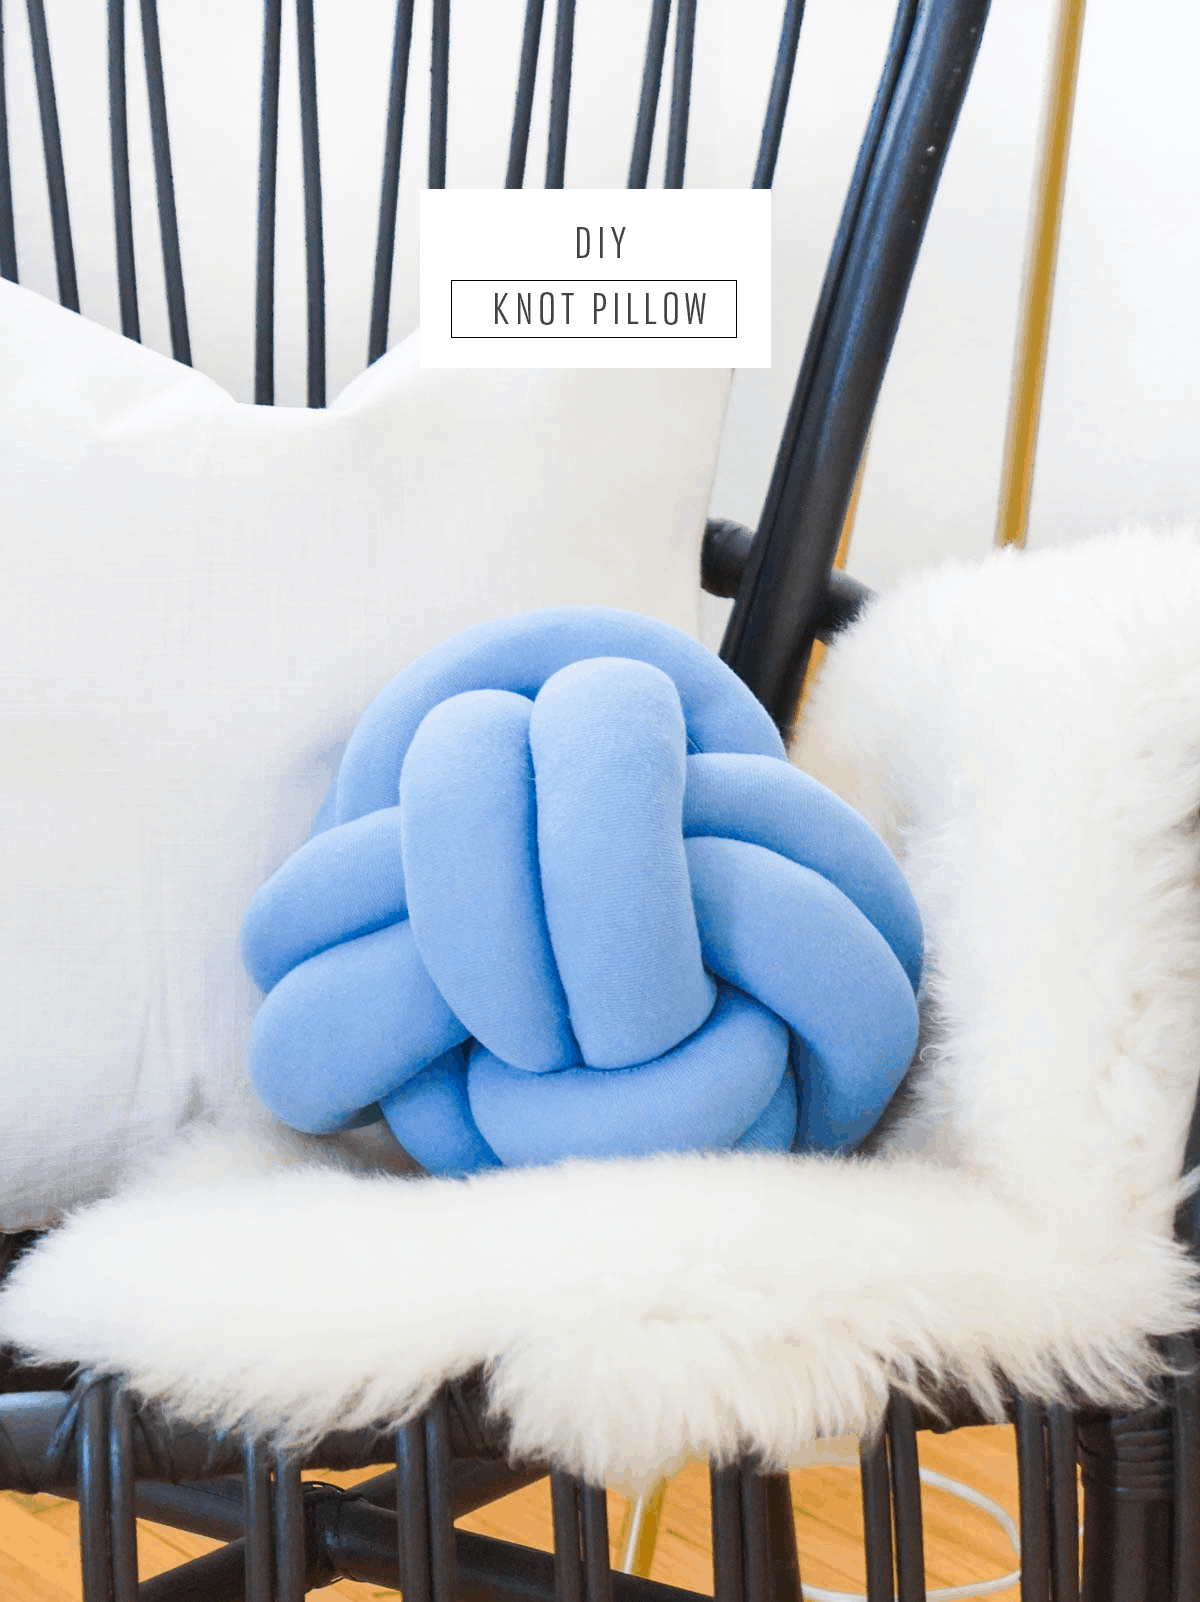 step by step tutorial instructions for How To Make A DIY Knot Pillow for your custom home decor color! by top Houston lifestyle blogger Ashley Rose #homedecor #diy #diyhomedecor #pillow #howto #decor #tutorial